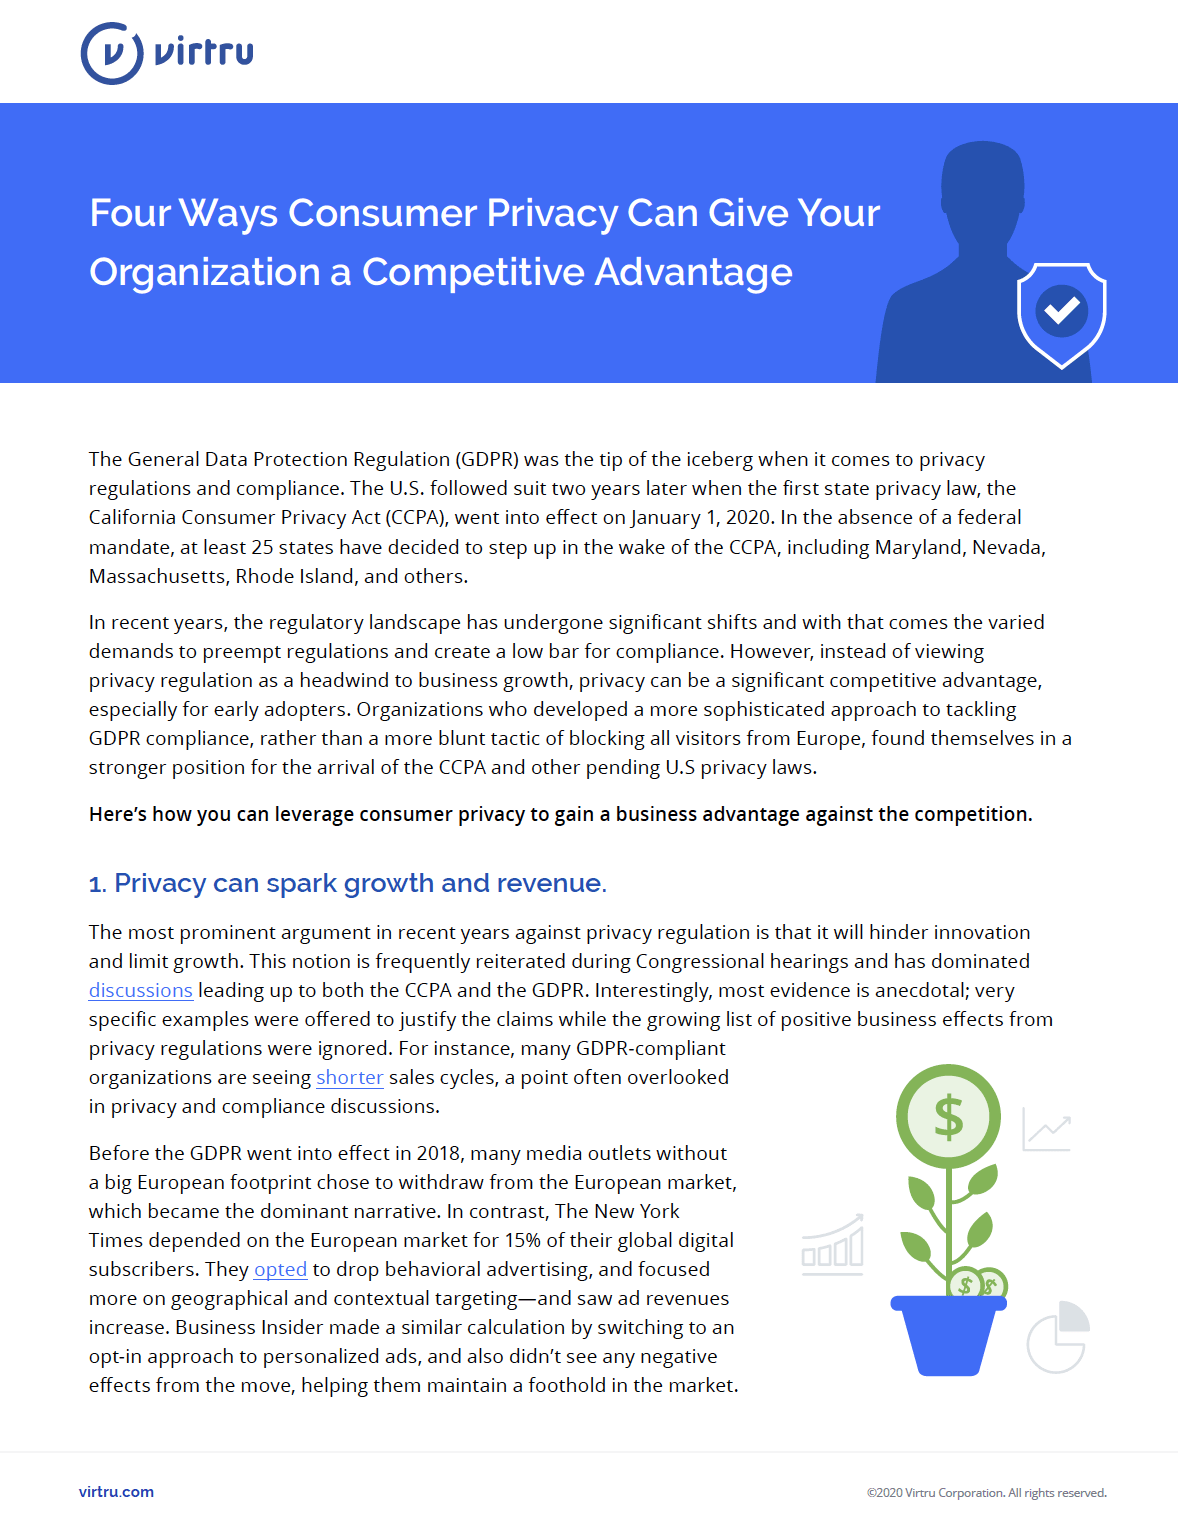 Cover Page for the Four Ways Consumer Privacy Can Give Your Organization a Competitive Advantage Guideprivacy-advantageprivacy-advantage